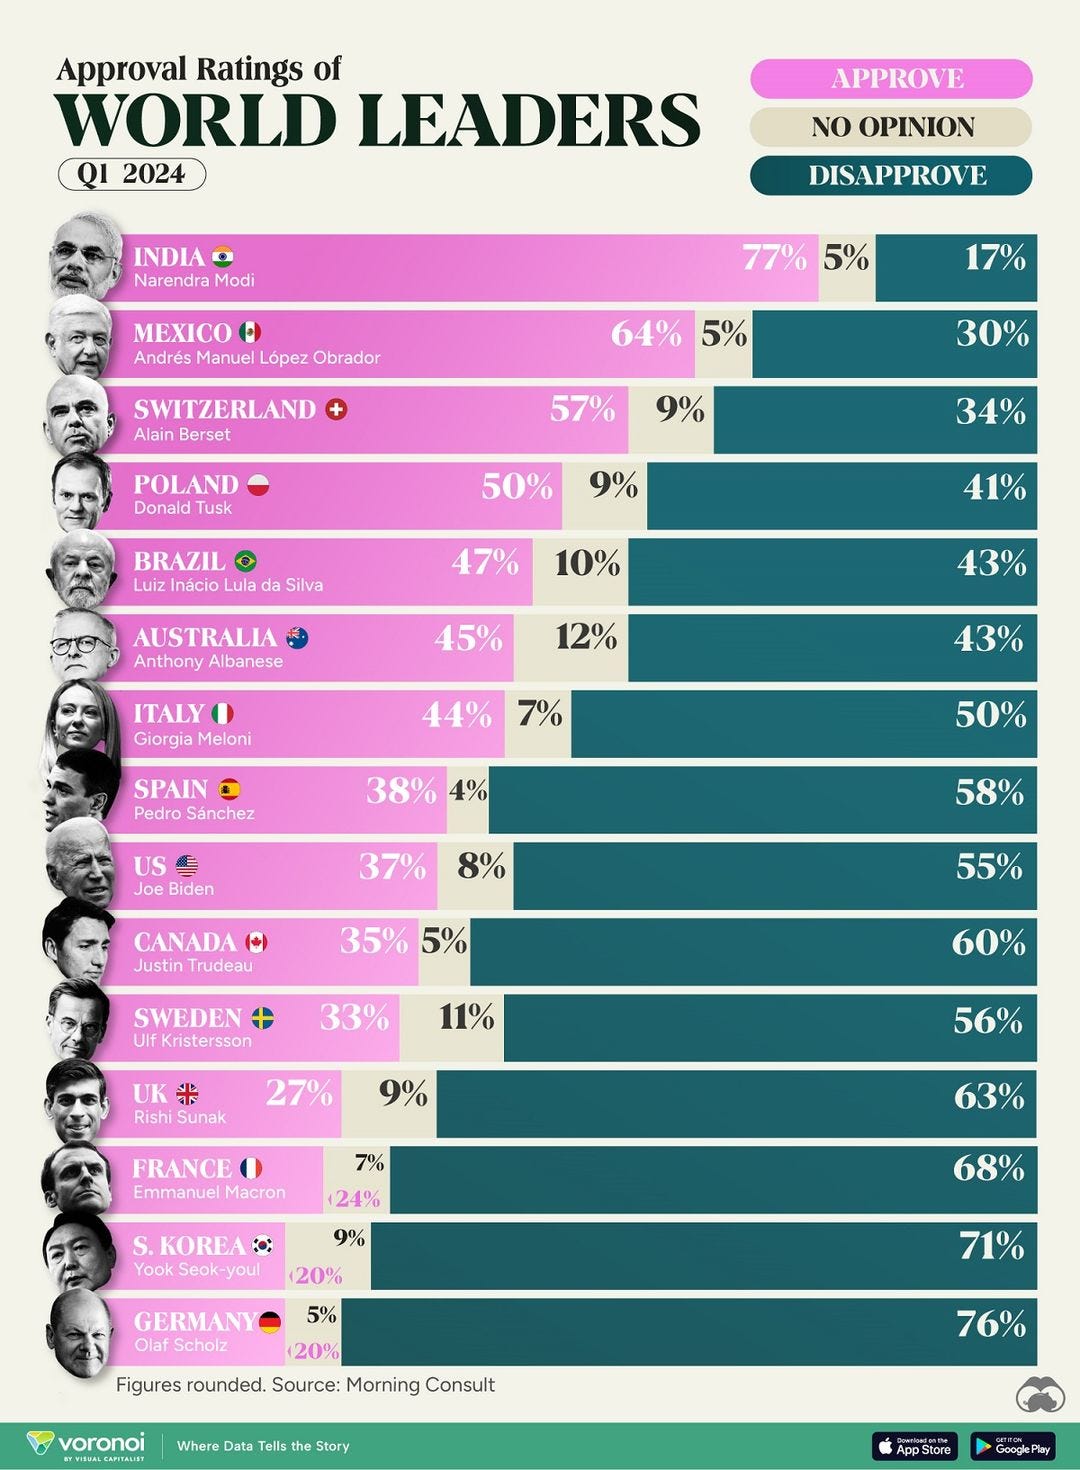 May be a graphic of text that says 'Approval Ratings of WORLD LEADERS 2024 APPROVE NO OPINION INDIA Narendra Modi DISAPPROVE MEXICO 0 Andrés Manuel López Obrador 77% 5% 17% SWITZERLAND Alain Berset 64% 5% POLAND Donald 57% 30% 9% 50% BRAZIL Luiz Inácio ulad 9% 34% Silva 47% 10% AUSTRALIA Albanese 41% 45% 12% ITALY Giorgia Meloni 43% 44% 7% SPAIN Pedro Sánchez 43% US Biden 50% 37% CANADA Justin rudeau 35% 5% SWEDEN 55% 33% 11% UK* Rishi Sunak 60% 27% 9% FRANCE Emmanuel Macron 56% 7% 24% KOREA Yook 9% 20% GERMANY Schol 5% 20% Figures rounded. Source: Morning Consult 71% voronoi 76%'